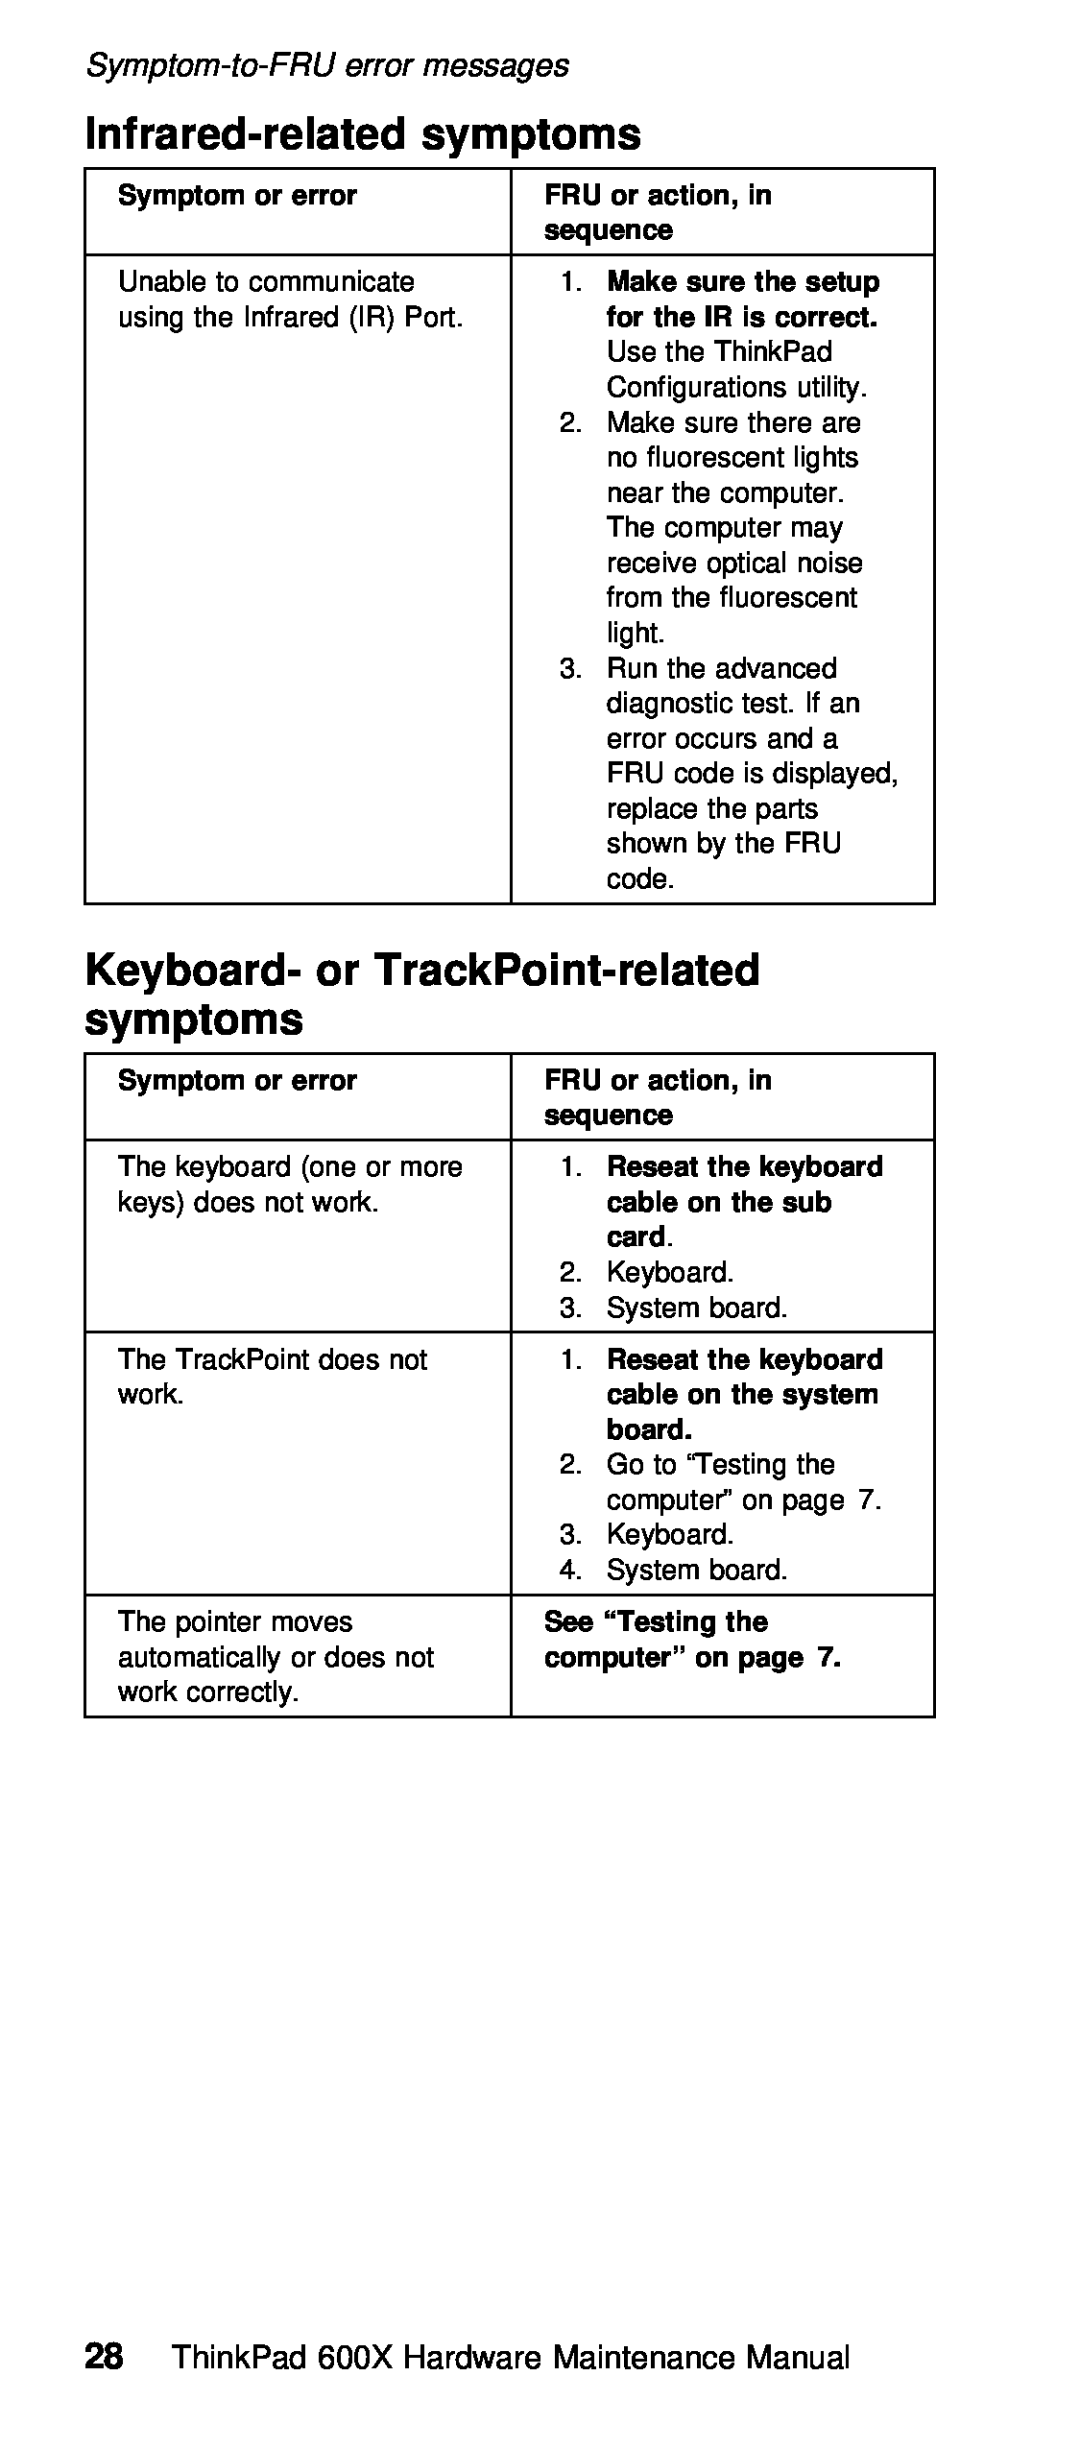 IBM 600X (MT 2646) manual Infrared-related symptoms, Keyboard- or TrackPoint-related symptoms 